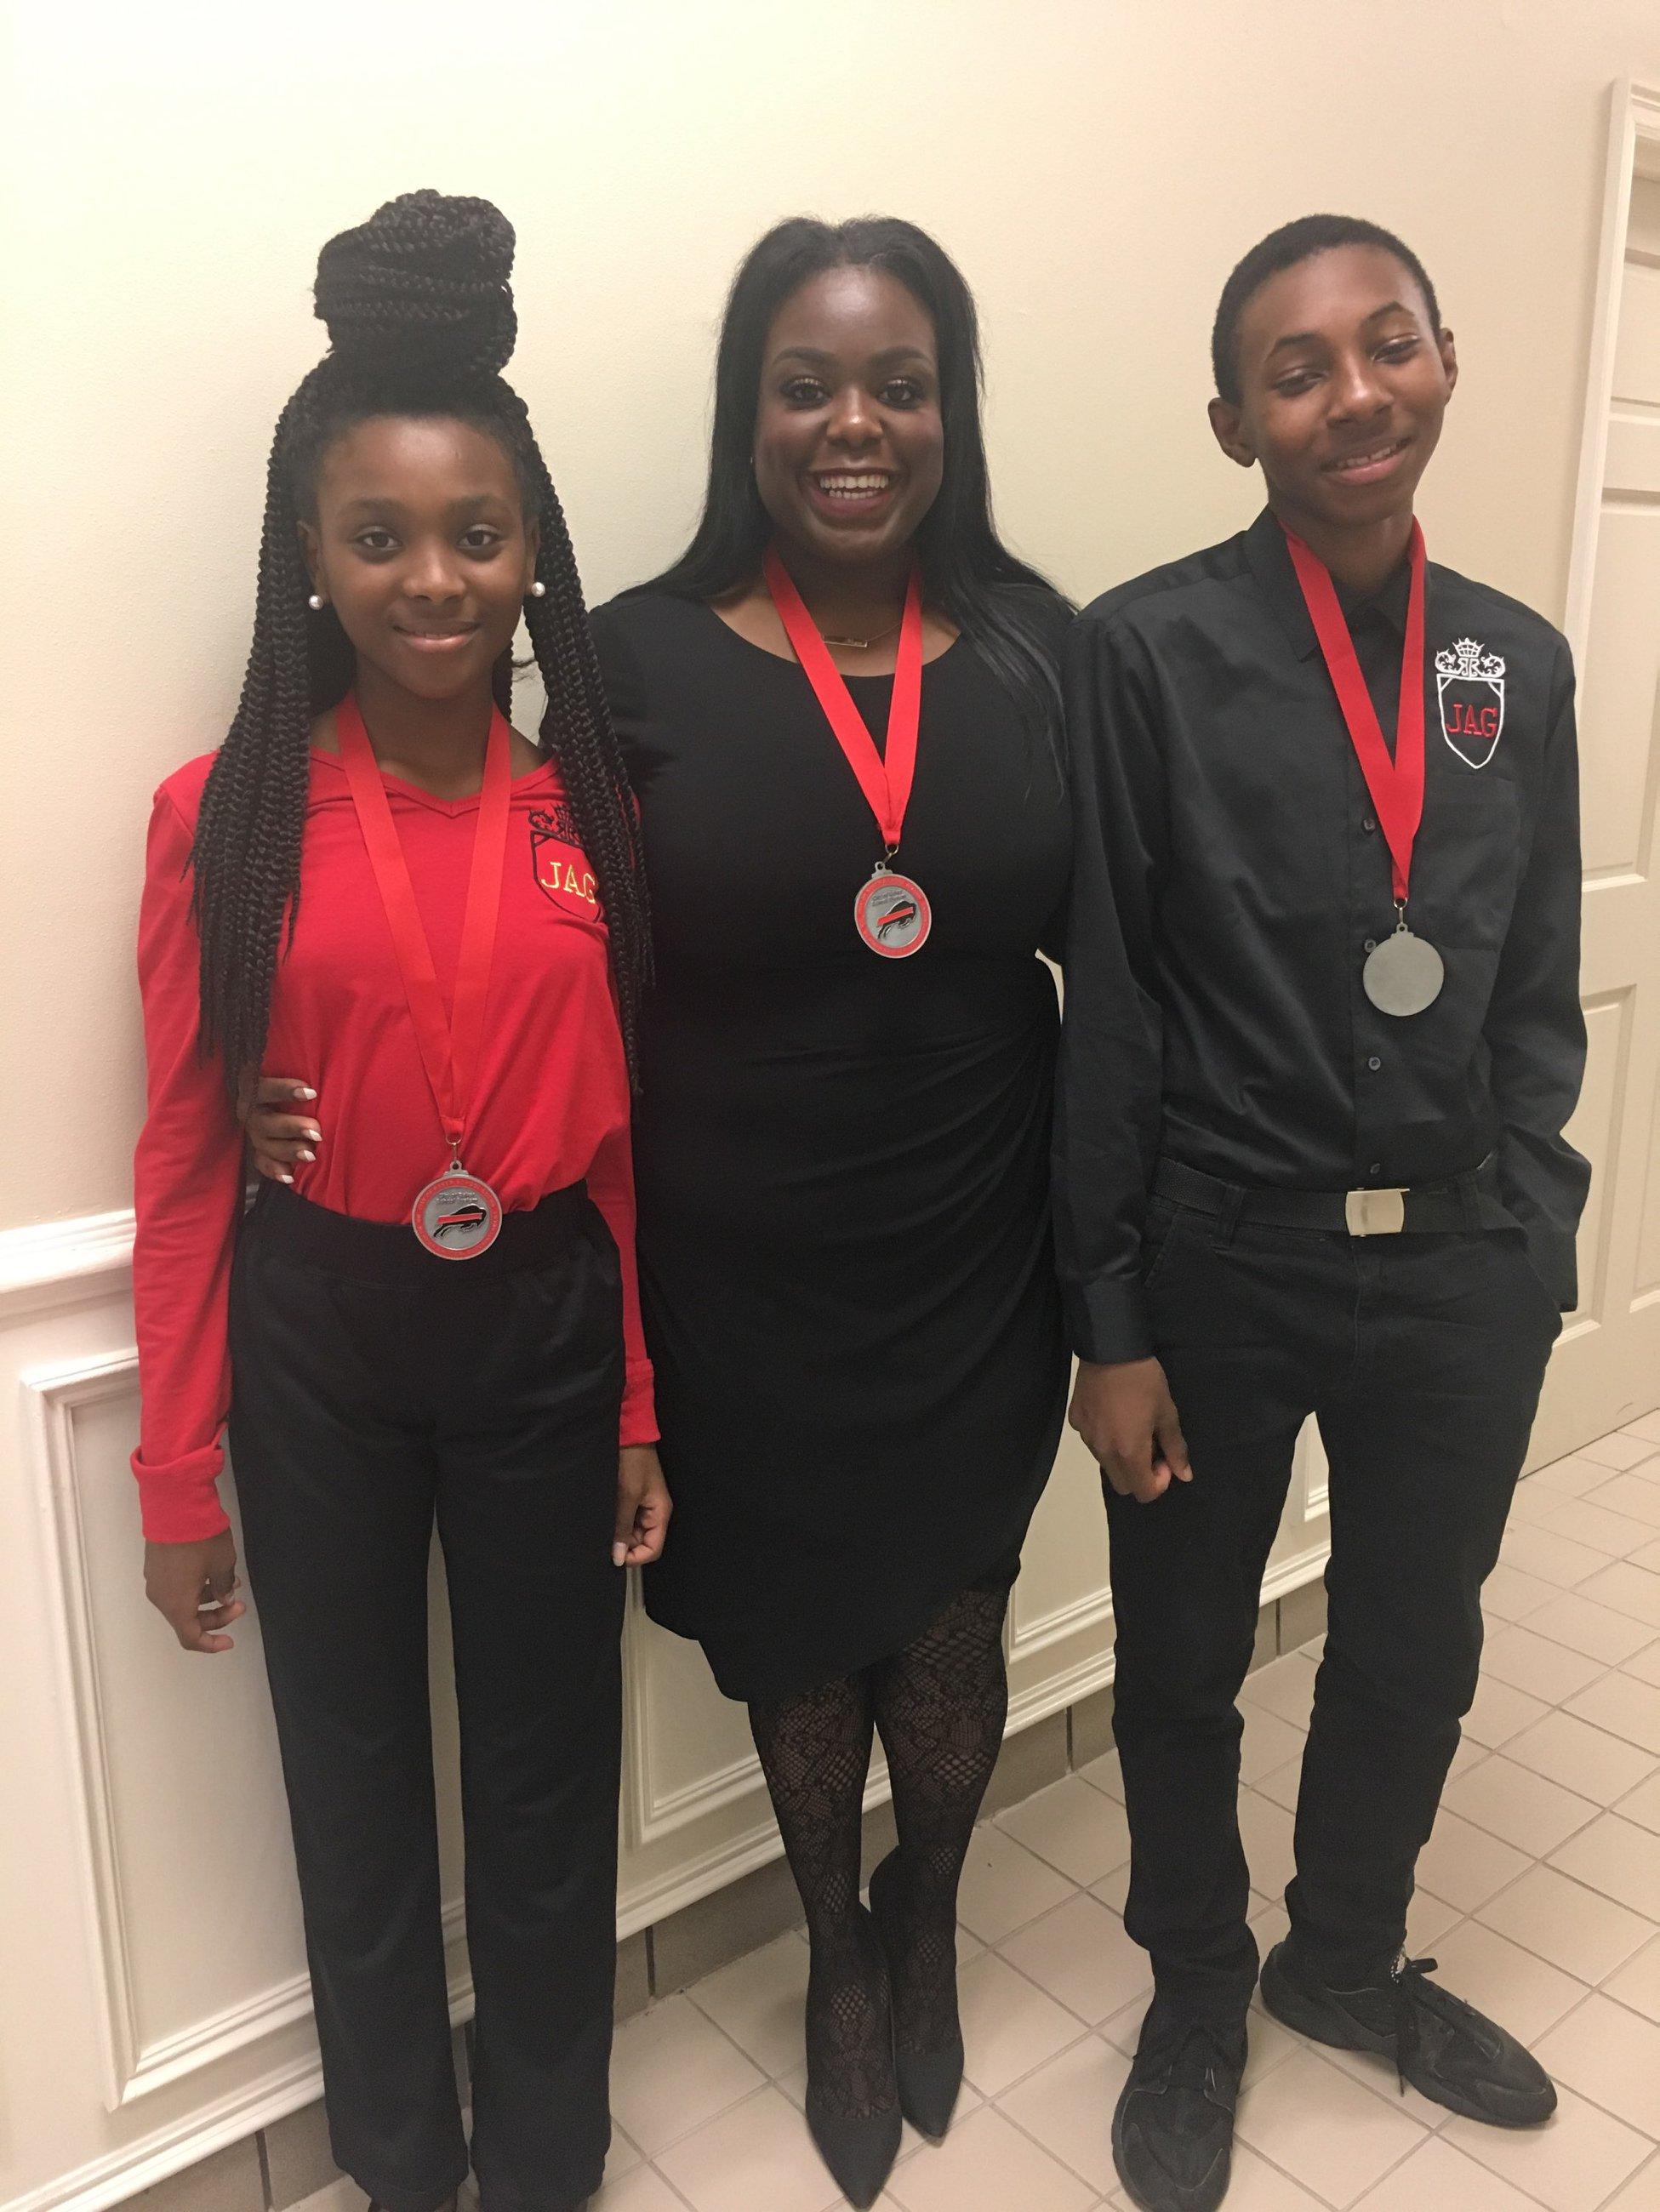 A photo of Baker Middle JAG students and teacher awarded district medallions